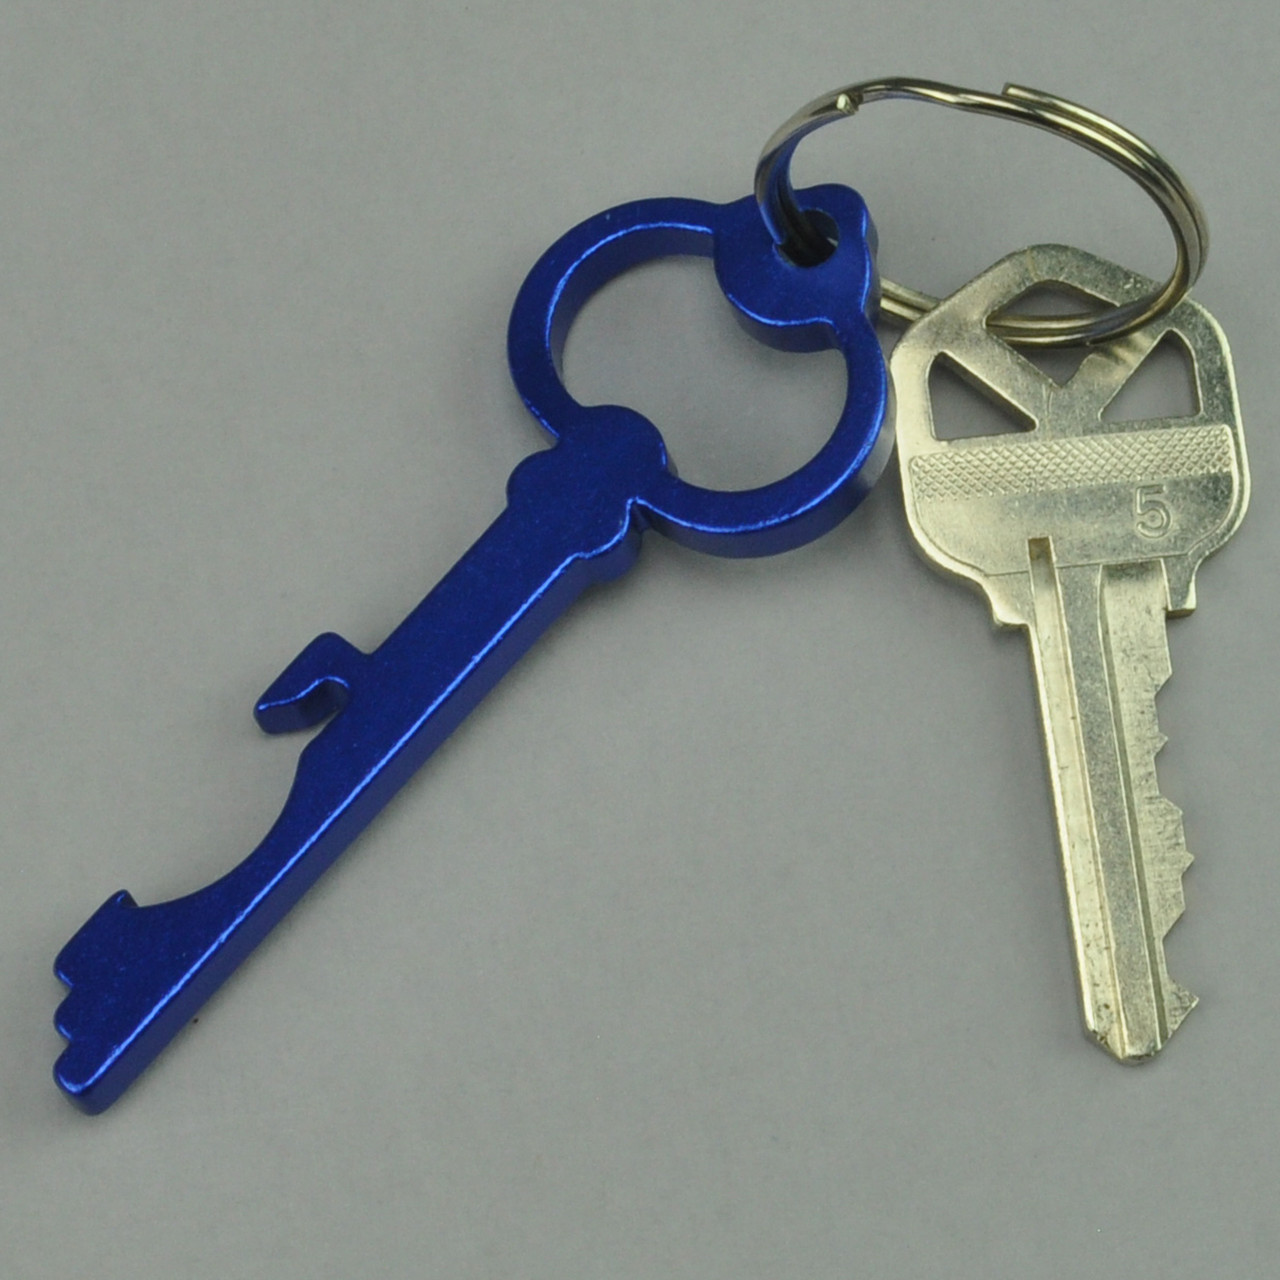 Shop for and Buy Bottle Opener Key Chain Top Popper at . Large  selection and bulk discounts available.